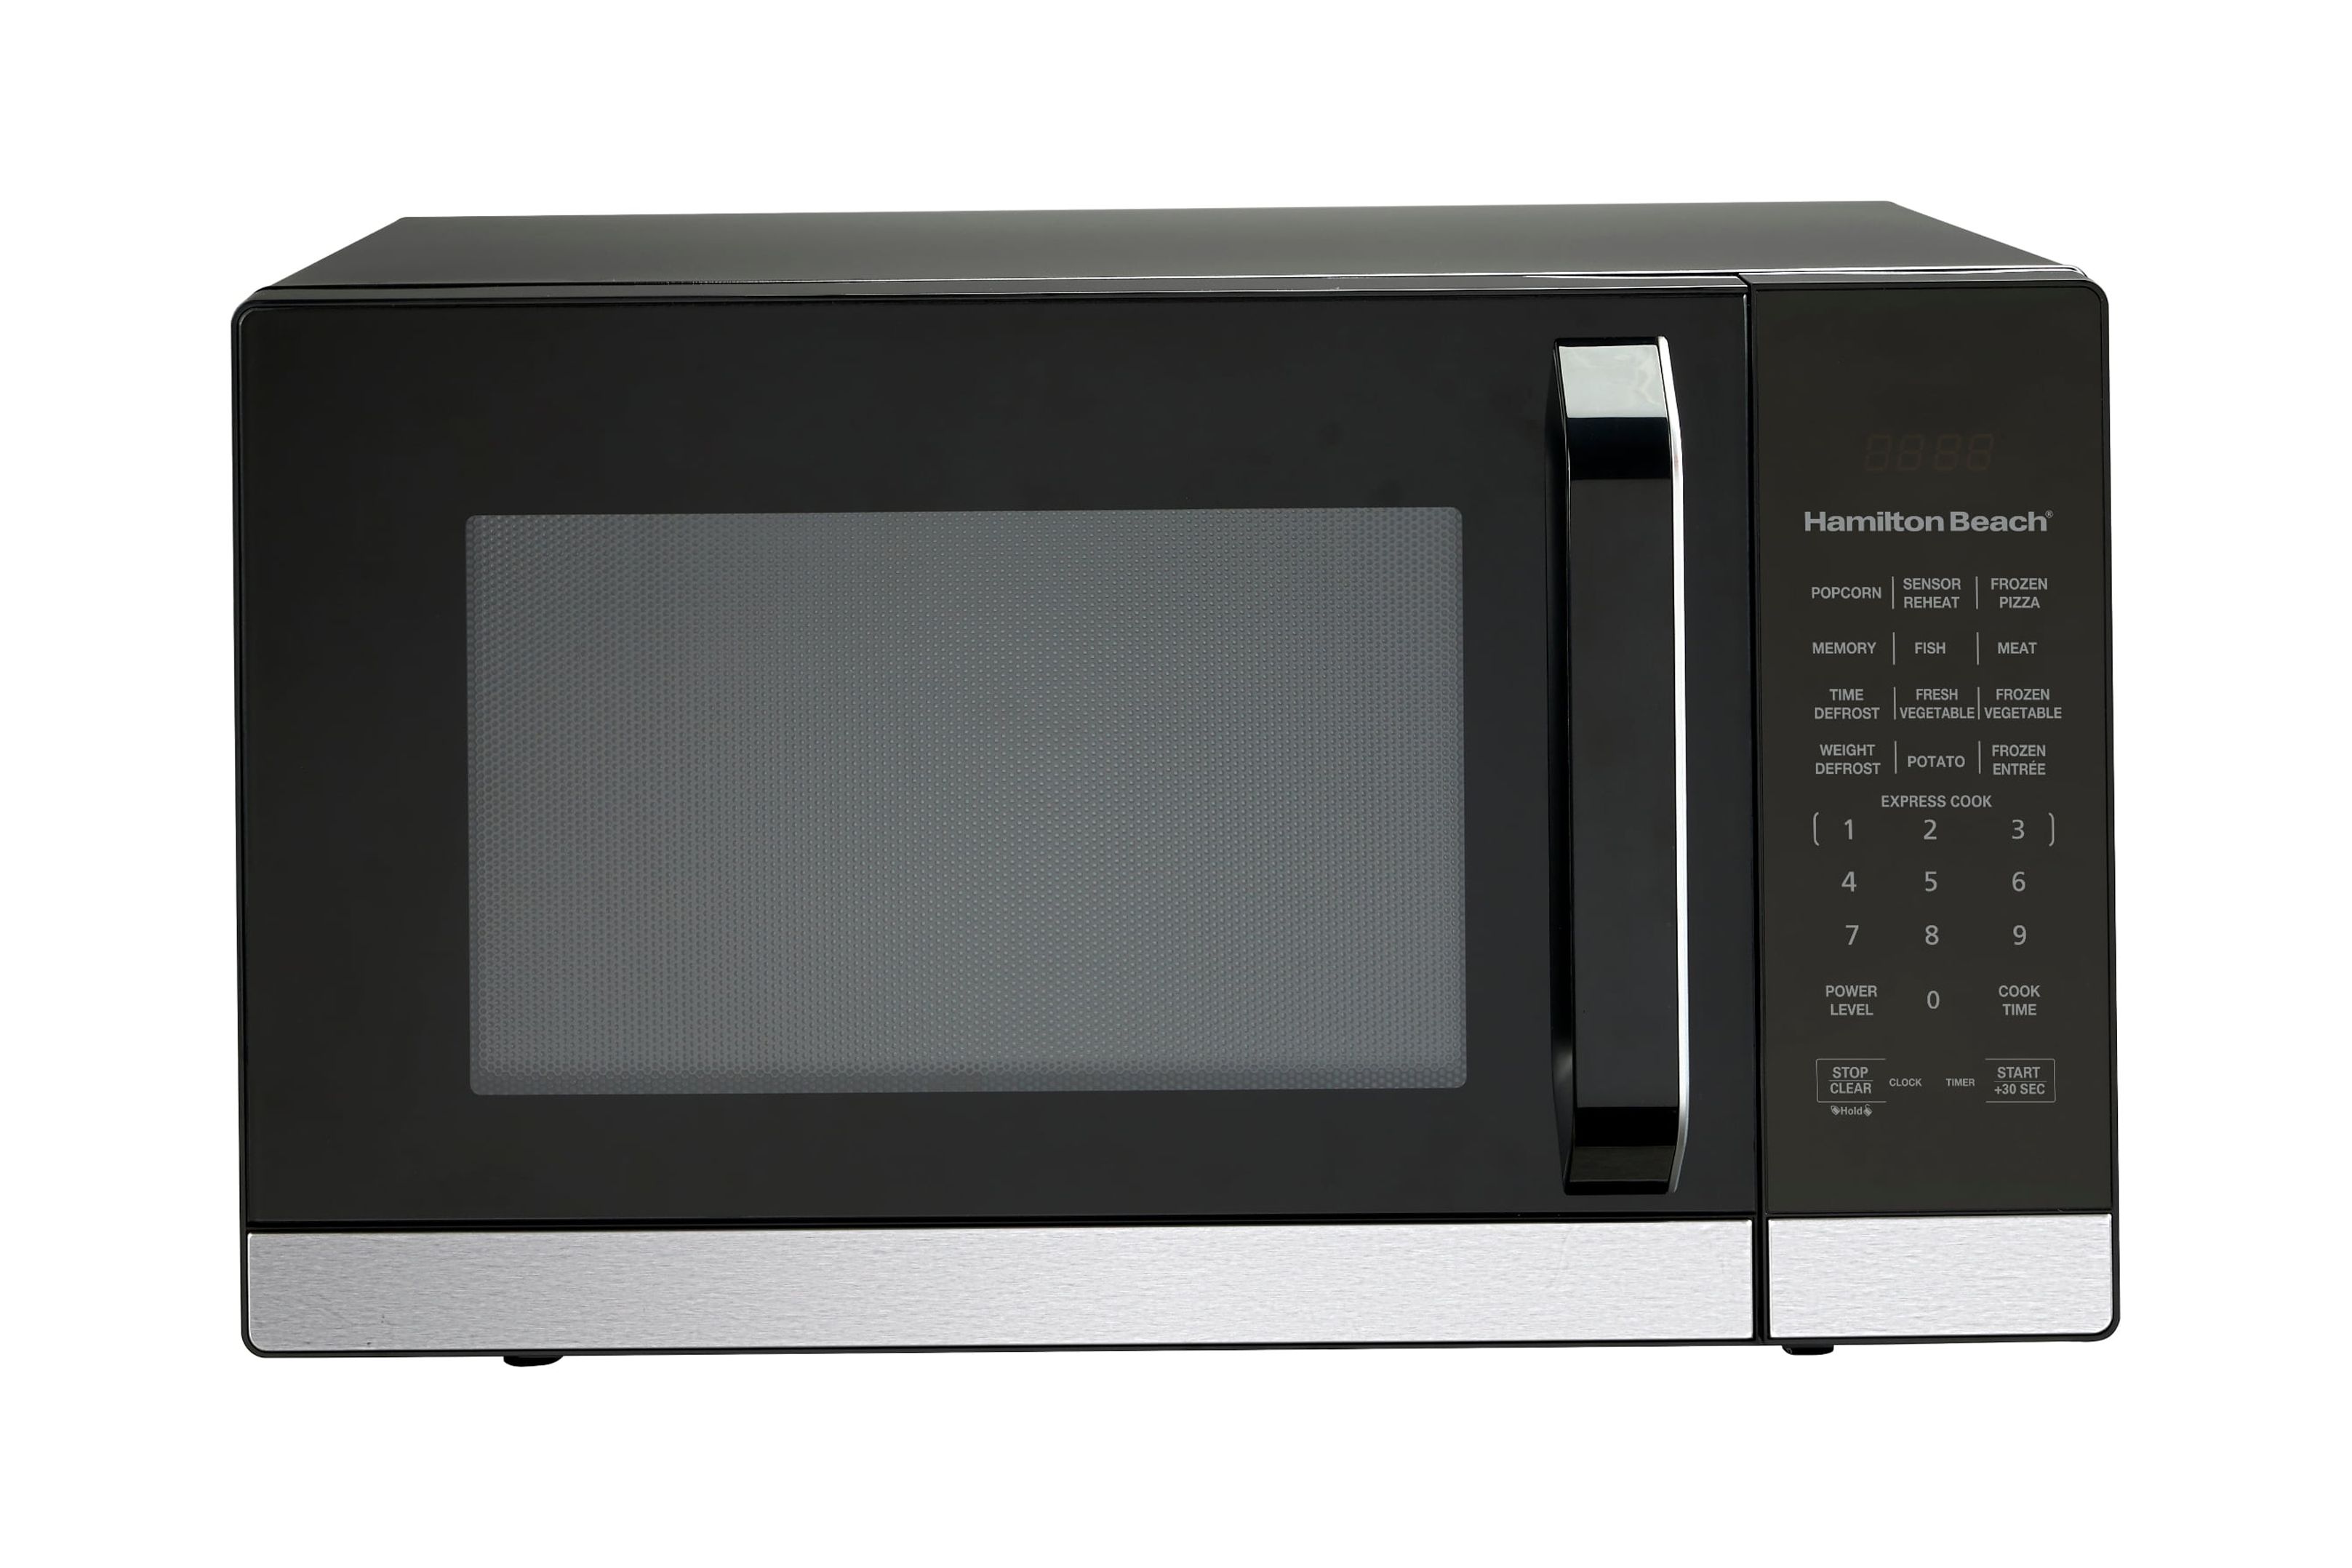 Hamilton Beach 1.4 Cu.ft. Microwave Oven, Stainless Steel, with Sensor - image 1 of 6